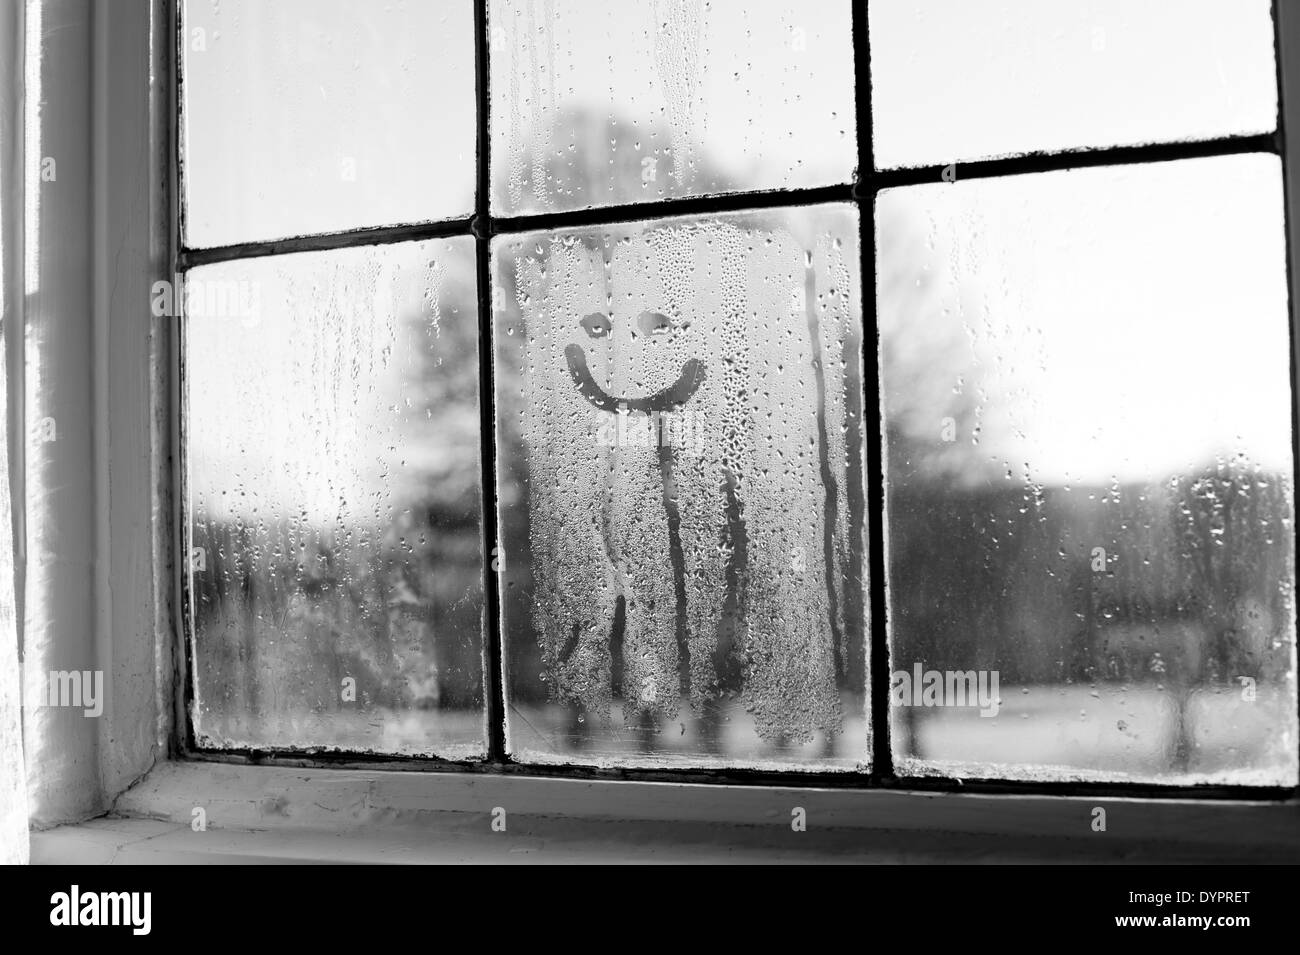 Smiley face on a window Stock Photo